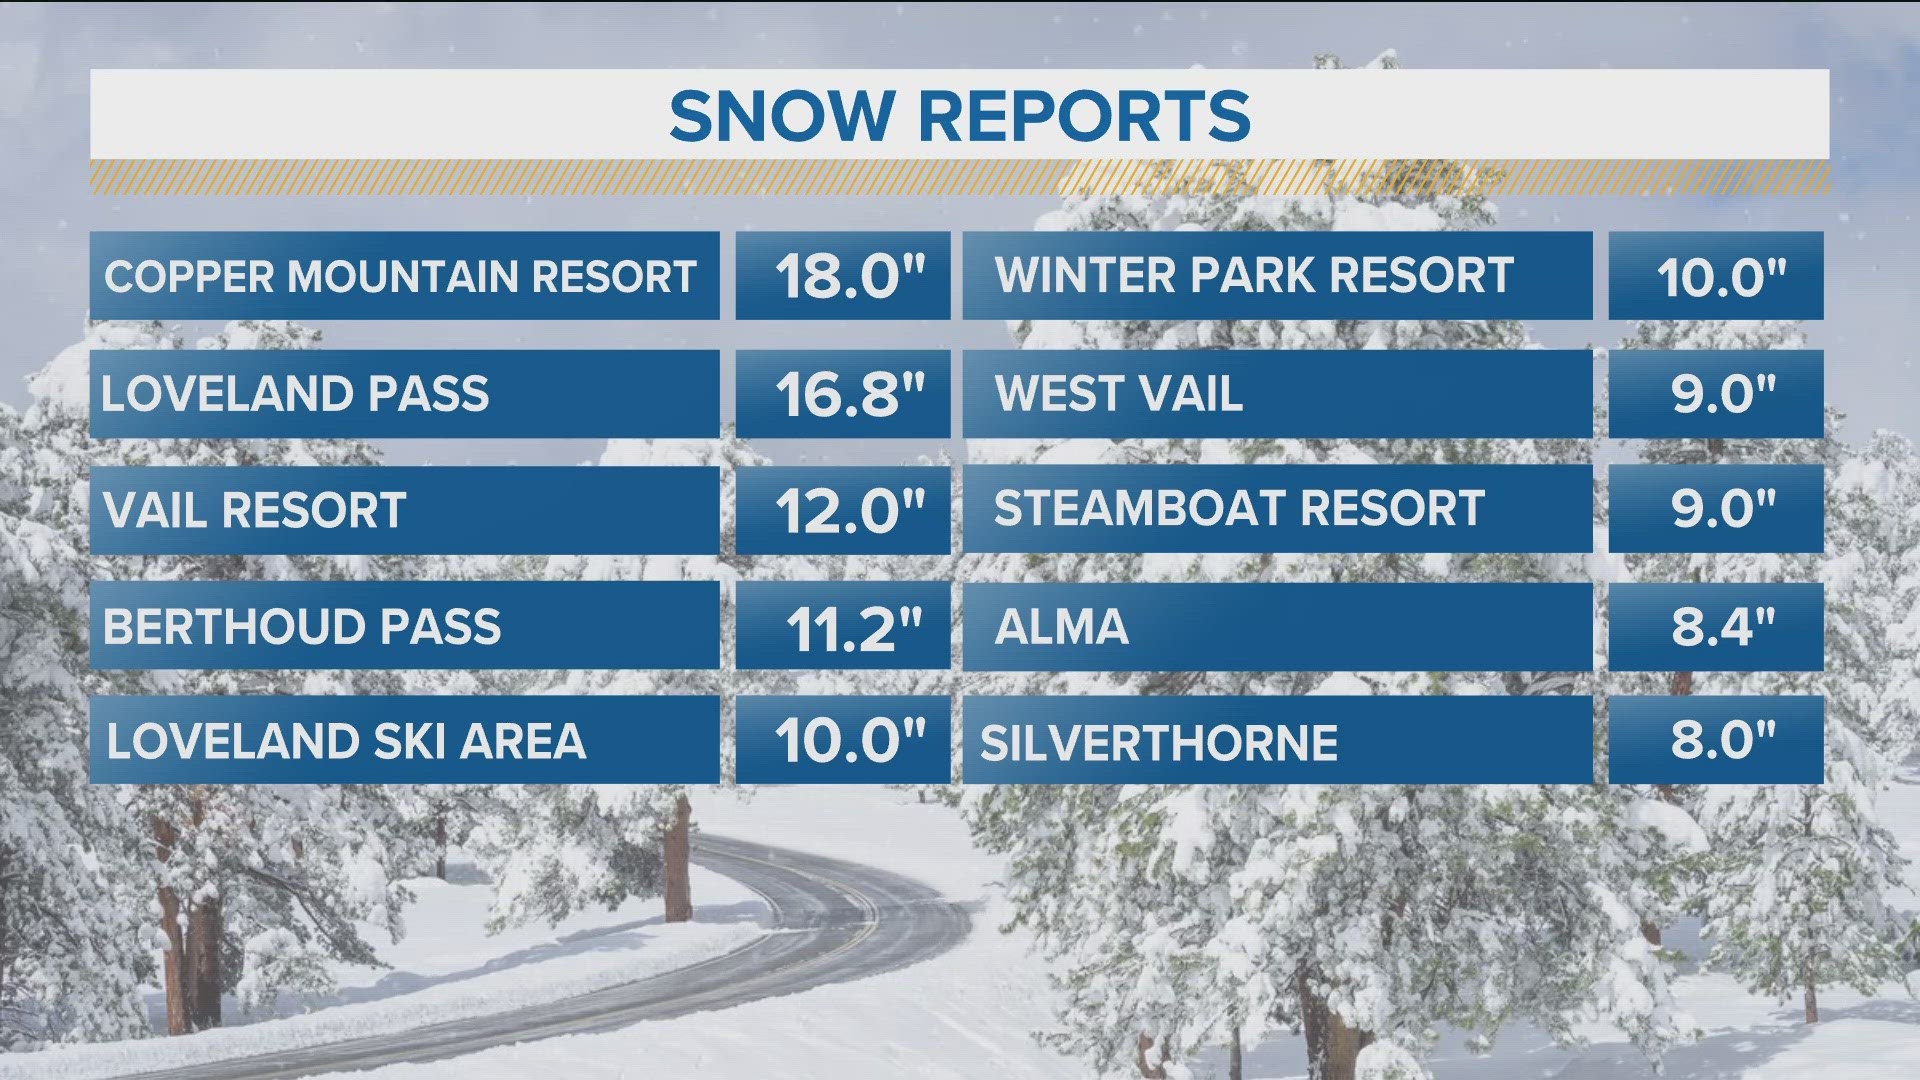 Monday's storm left some mountain locations with more than a foot of snow.